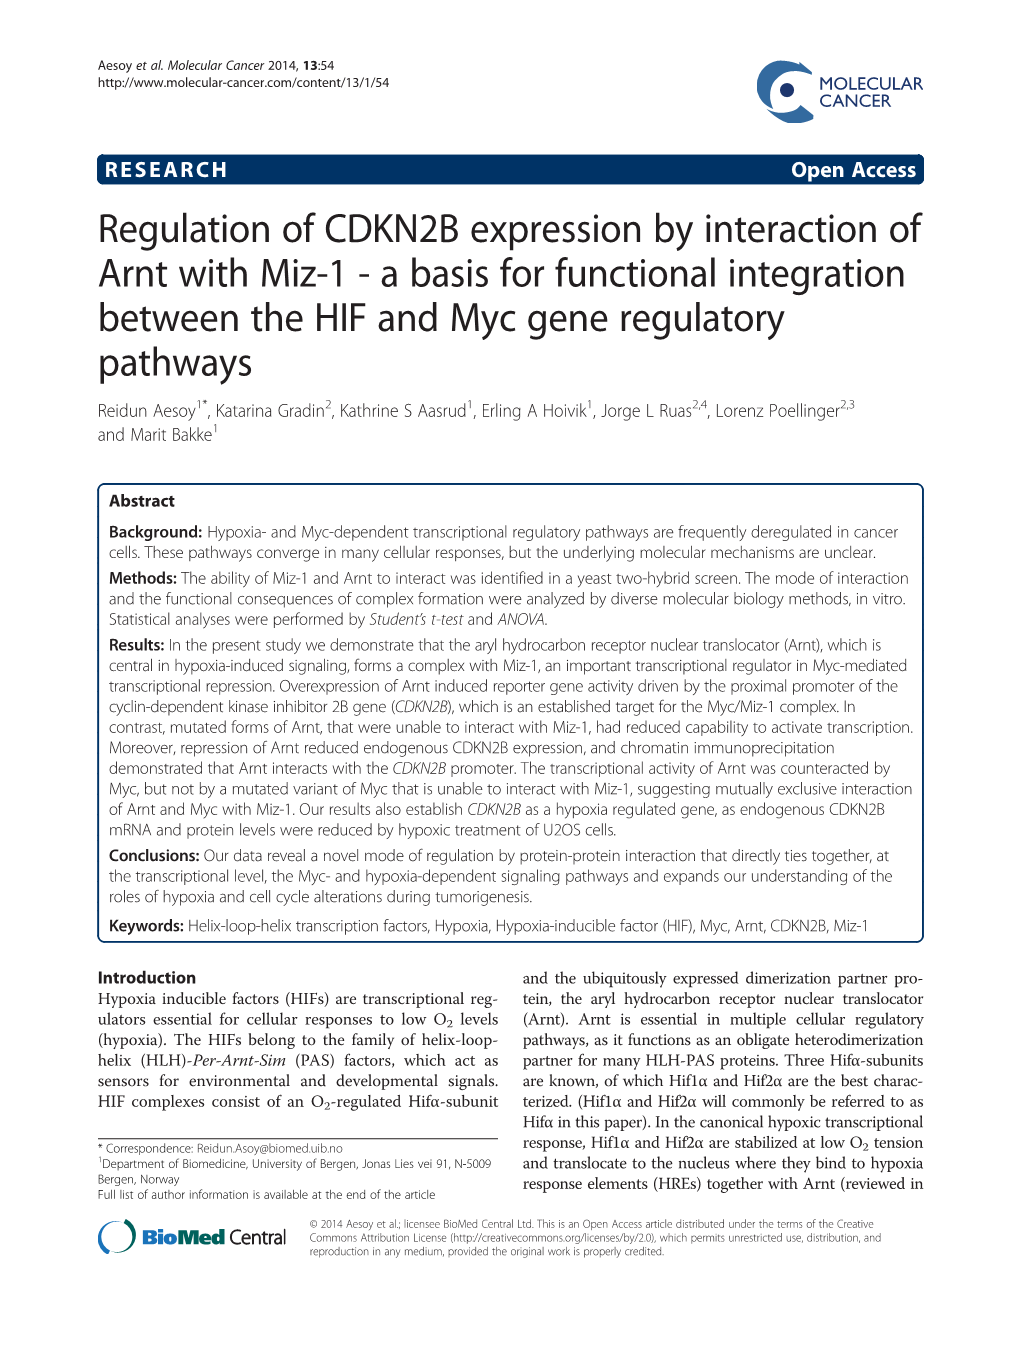 Regulation of CDKN2B Expression by Interaction Of